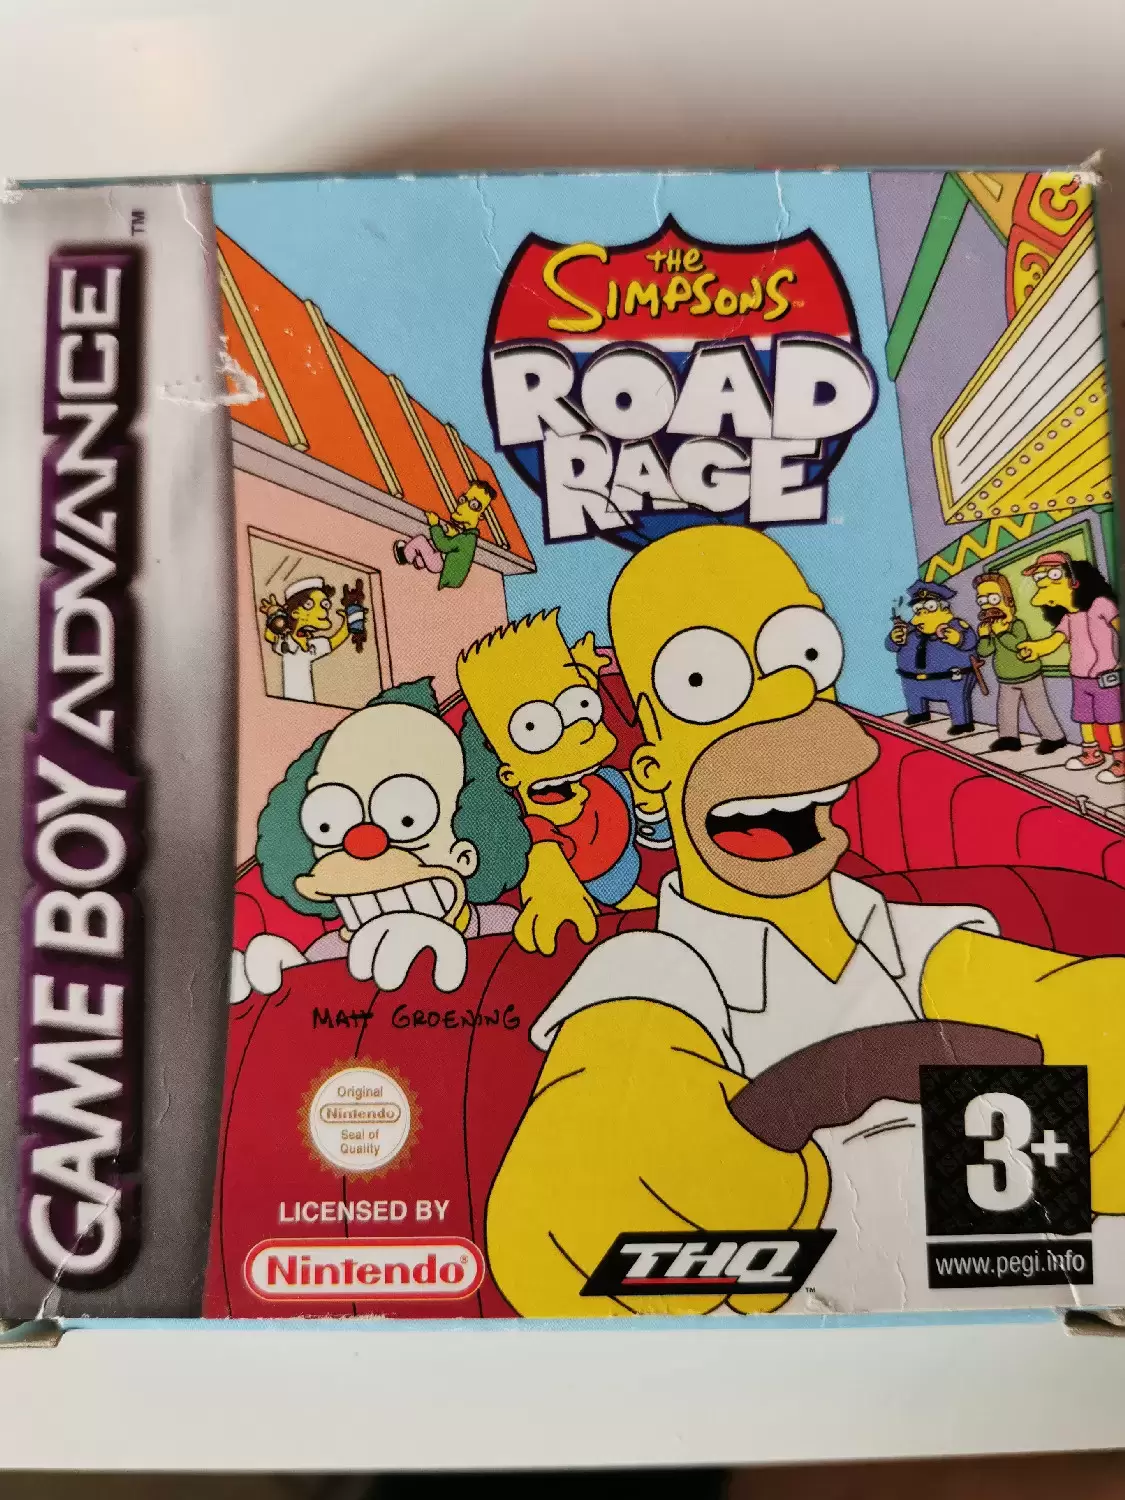 Jeux Game Boy Advance - The Simpsons Road rage